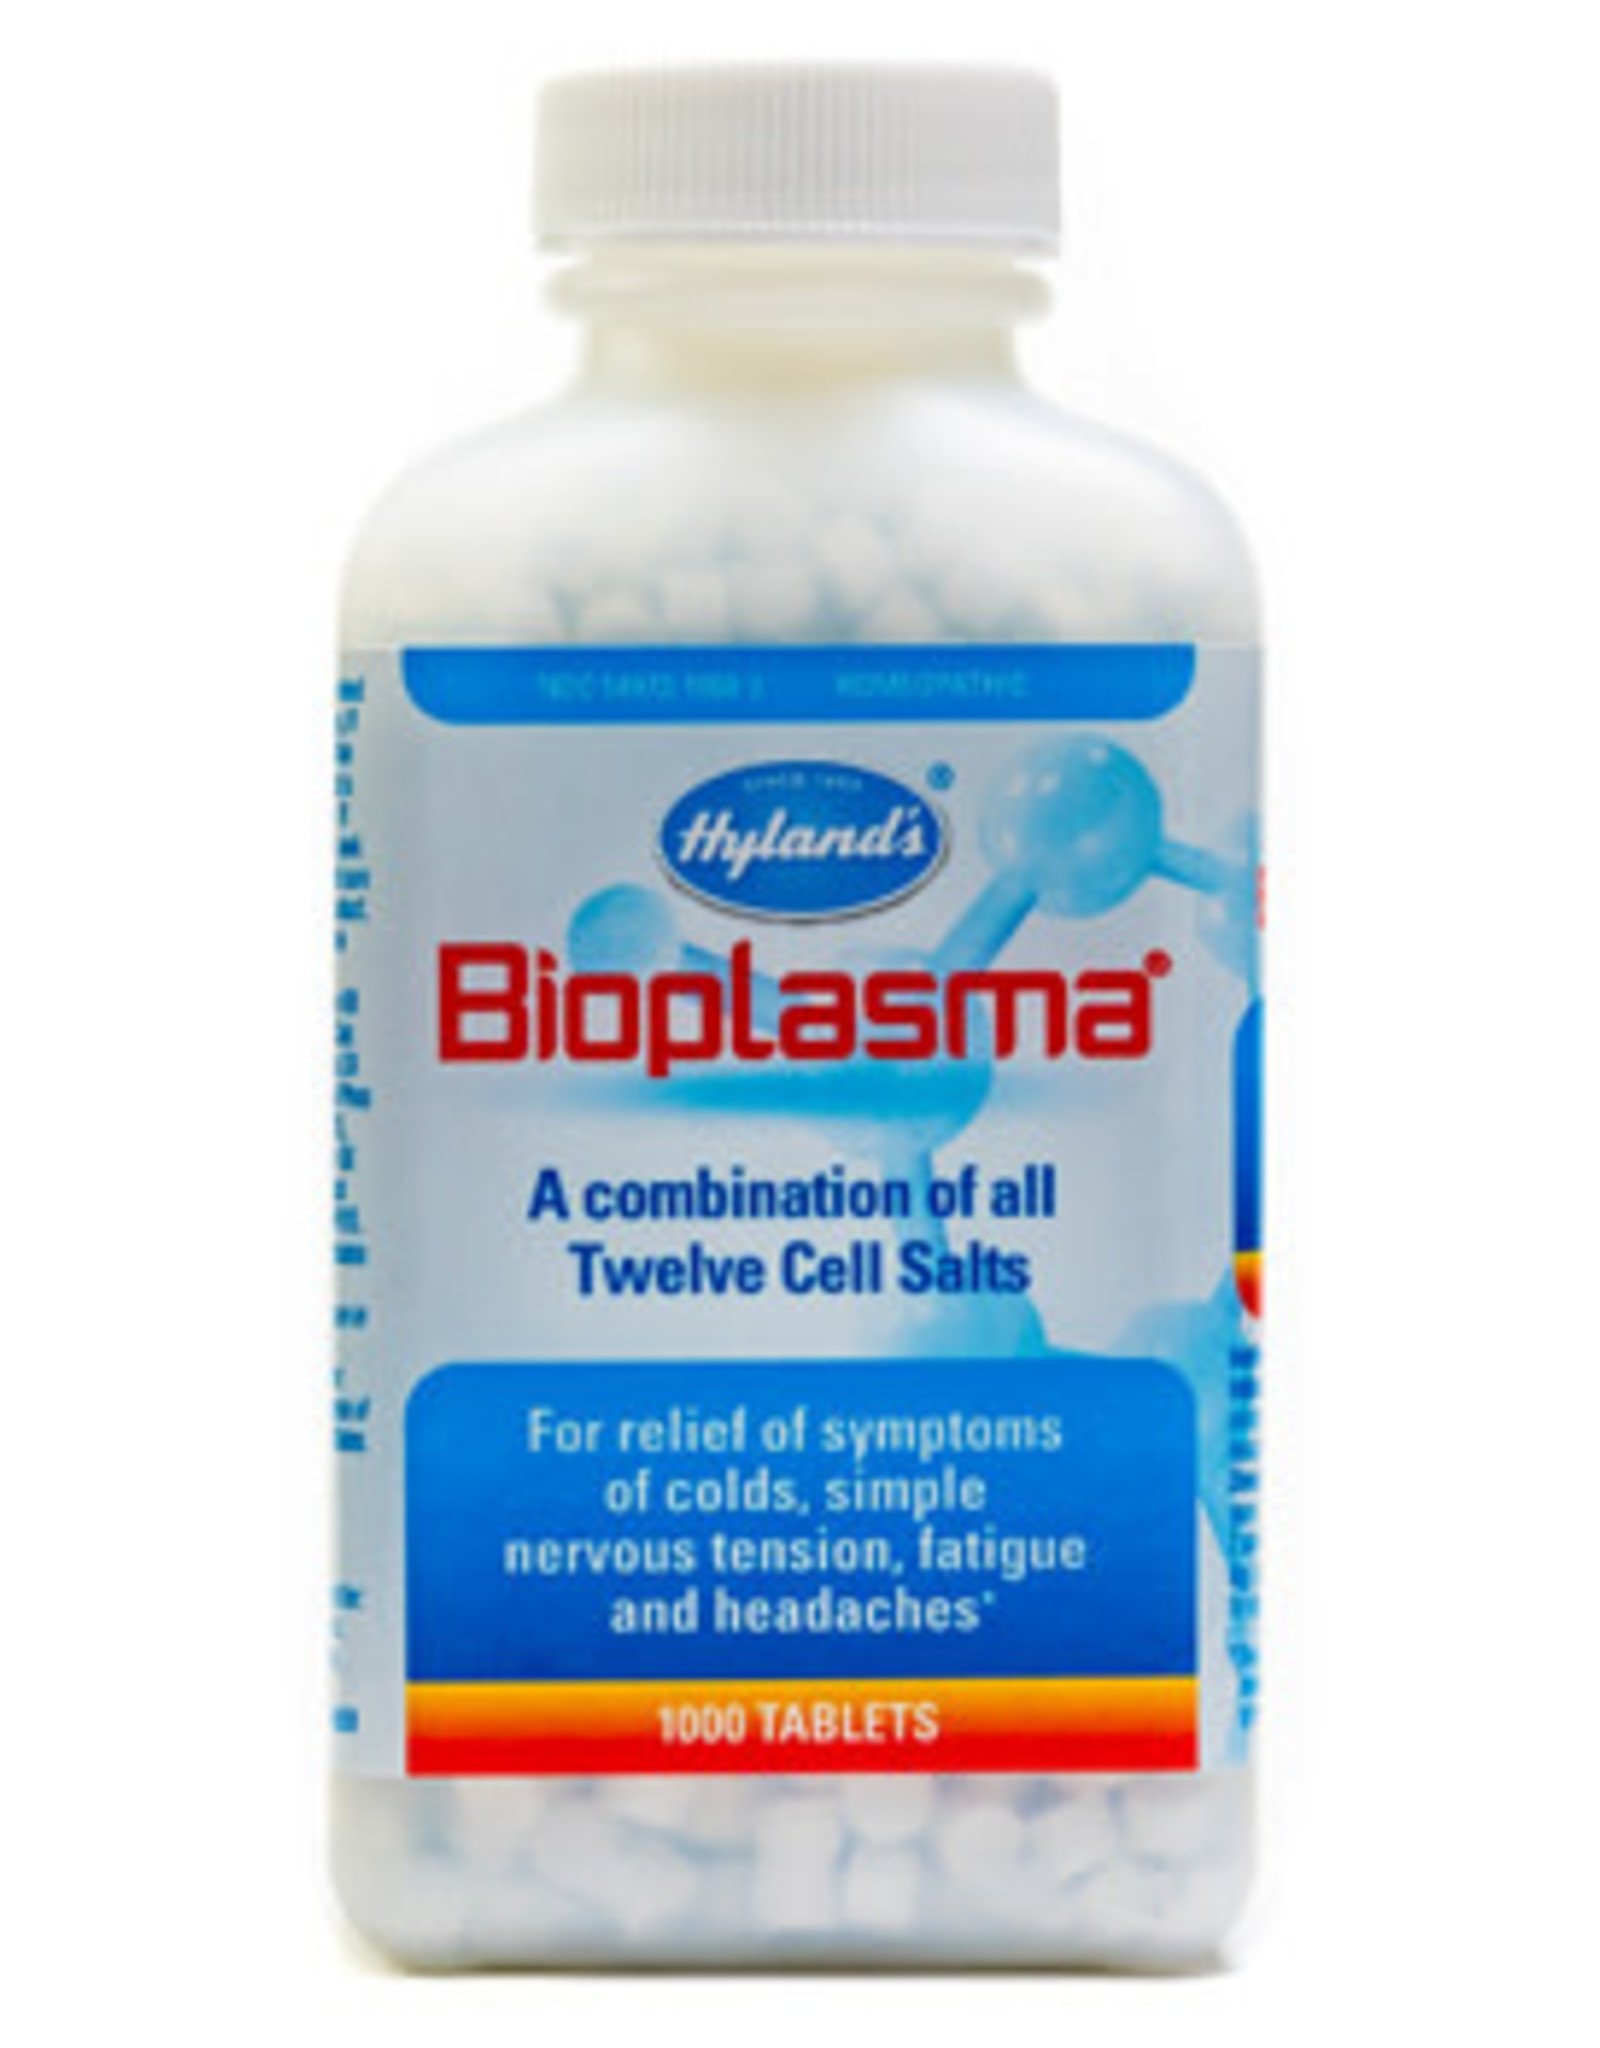 Hyland's Bioplasma-Combination of all 12 Cell Salts